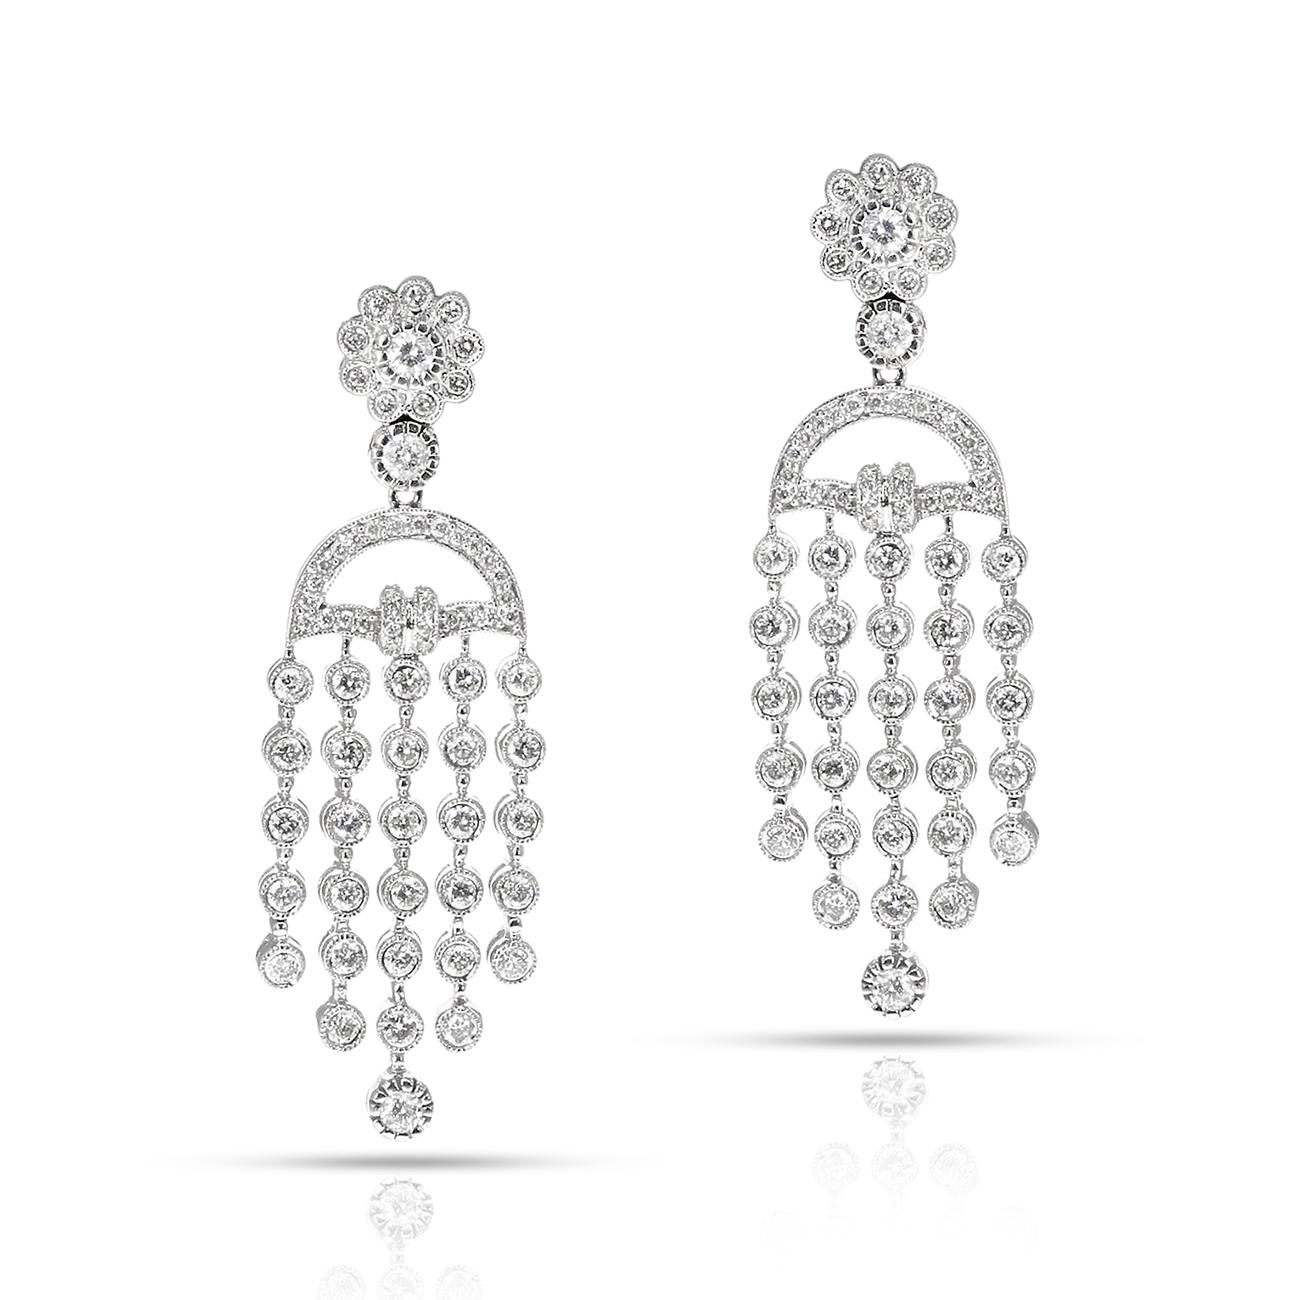 A pair of Diamond Dangling Earrings in 14K White Gold. The diamonds weigh appx. 2 carats. The length is 2 inches. The total weight of the diamonds is 13.90 grams.